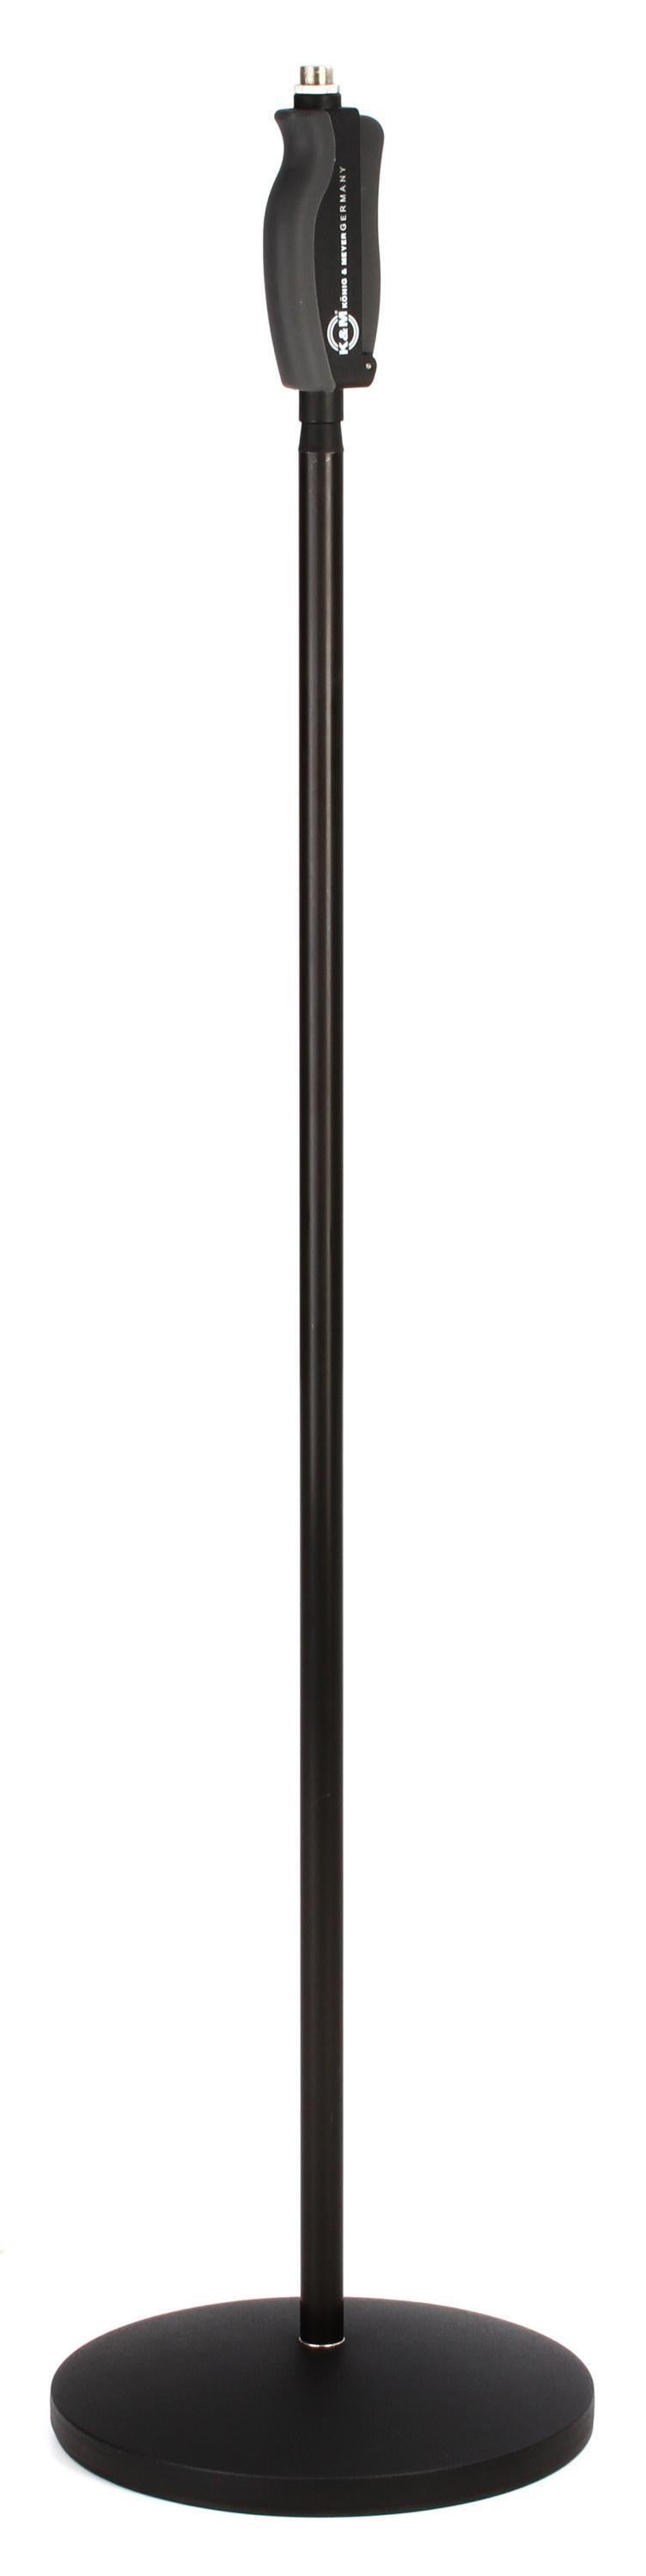 K&M 26085 One-hand Microphone Stand | Sweetwater